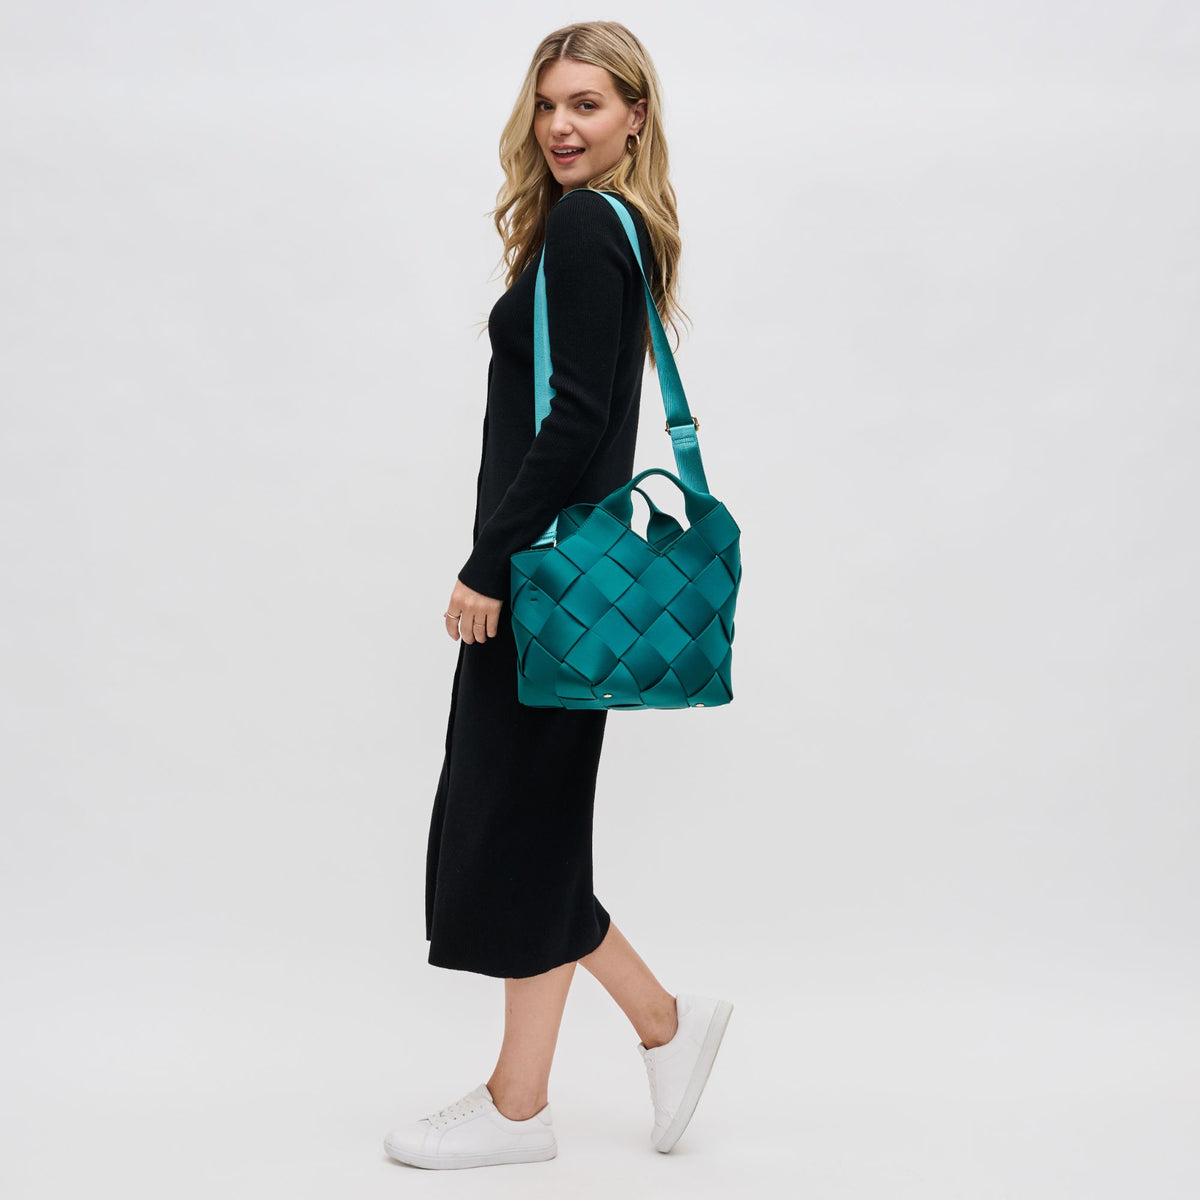 Woman wearing Forest Sol and Selene Resilience - Woven Neoprene Tote 841764108591 View 3 | Forest